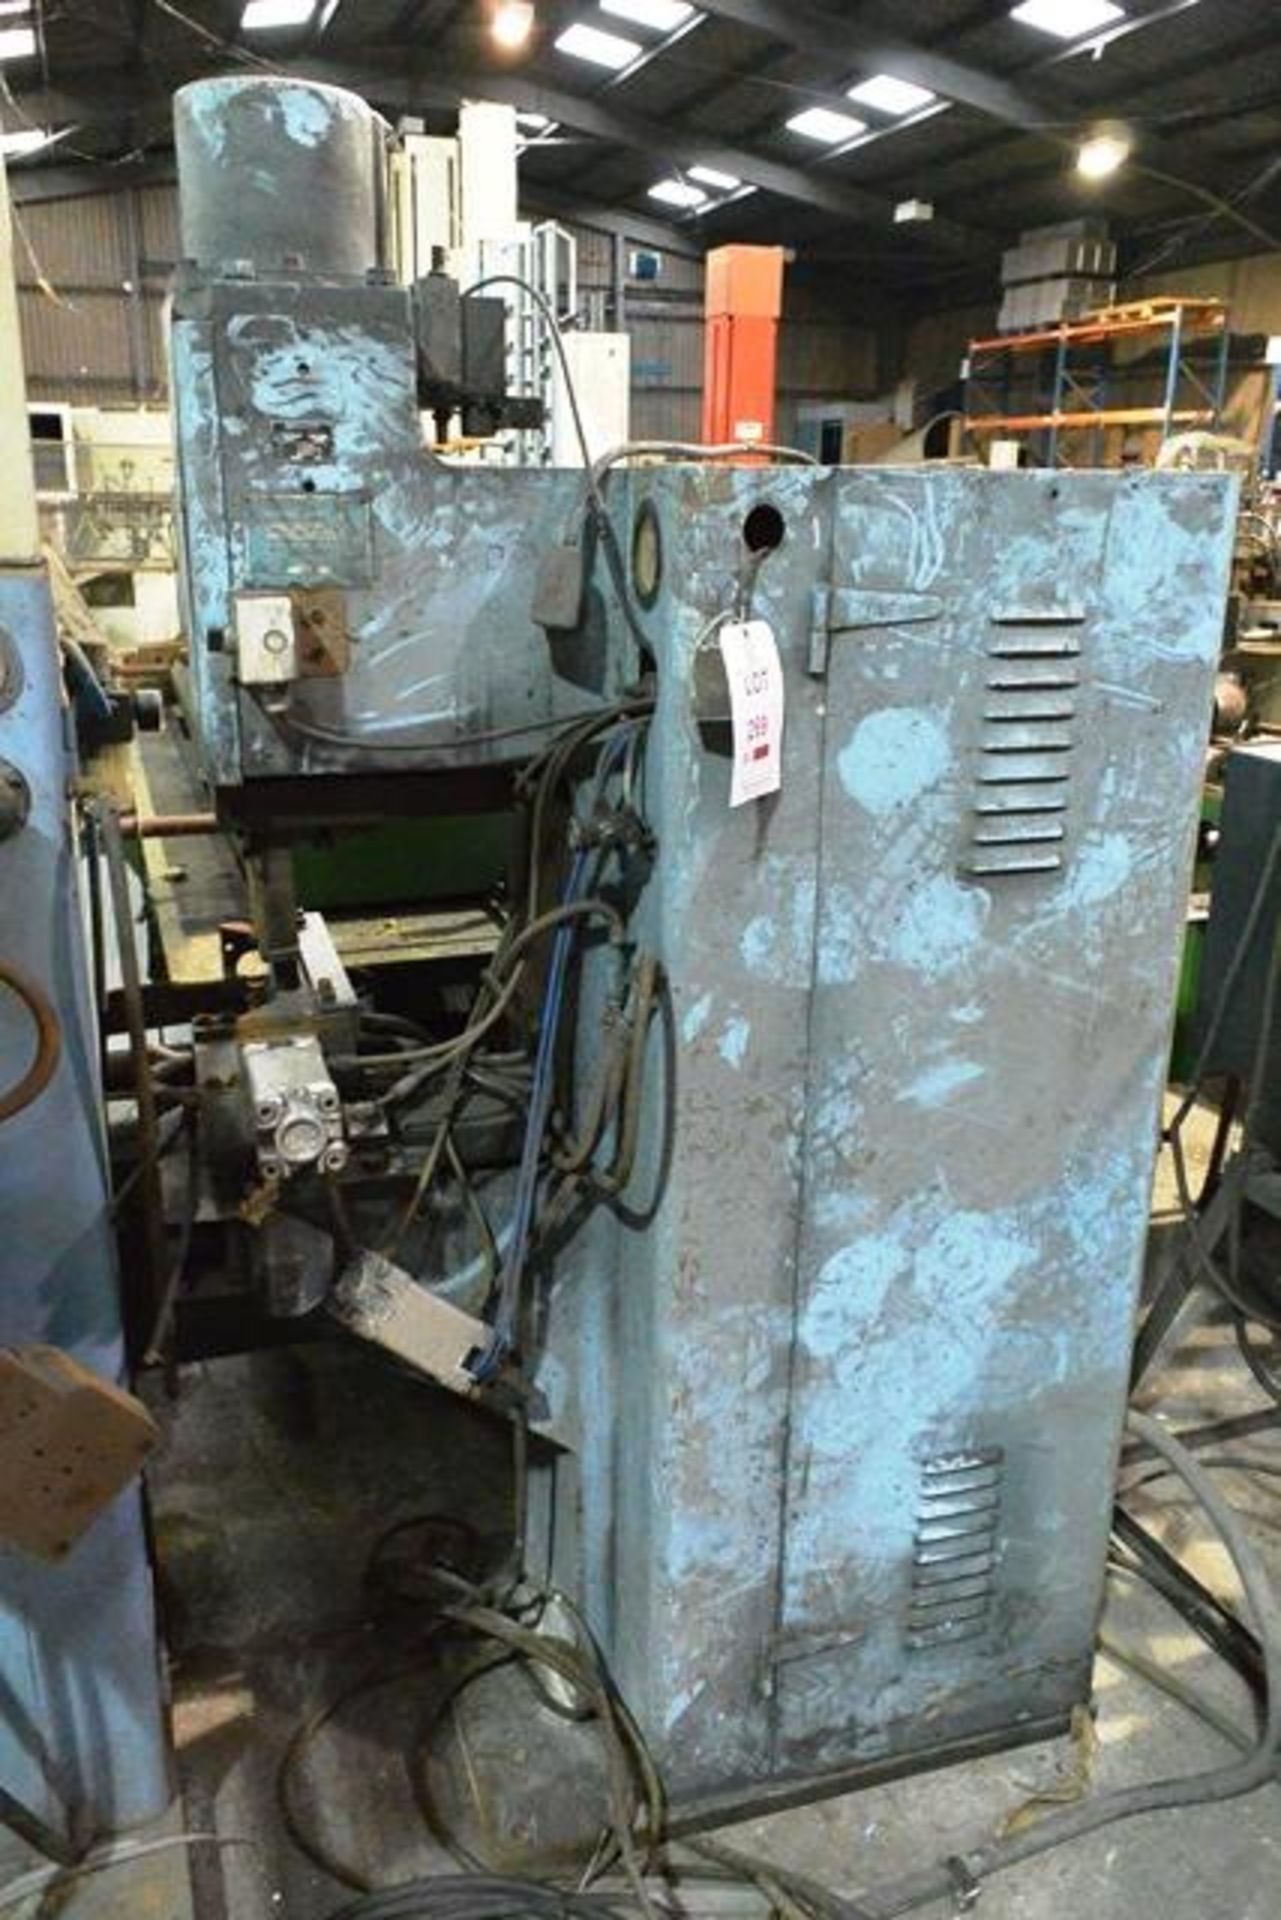 Sciaky PA100 welder, serial no: 14031 (around 1985) (3 phase) (working condition unknown) (please